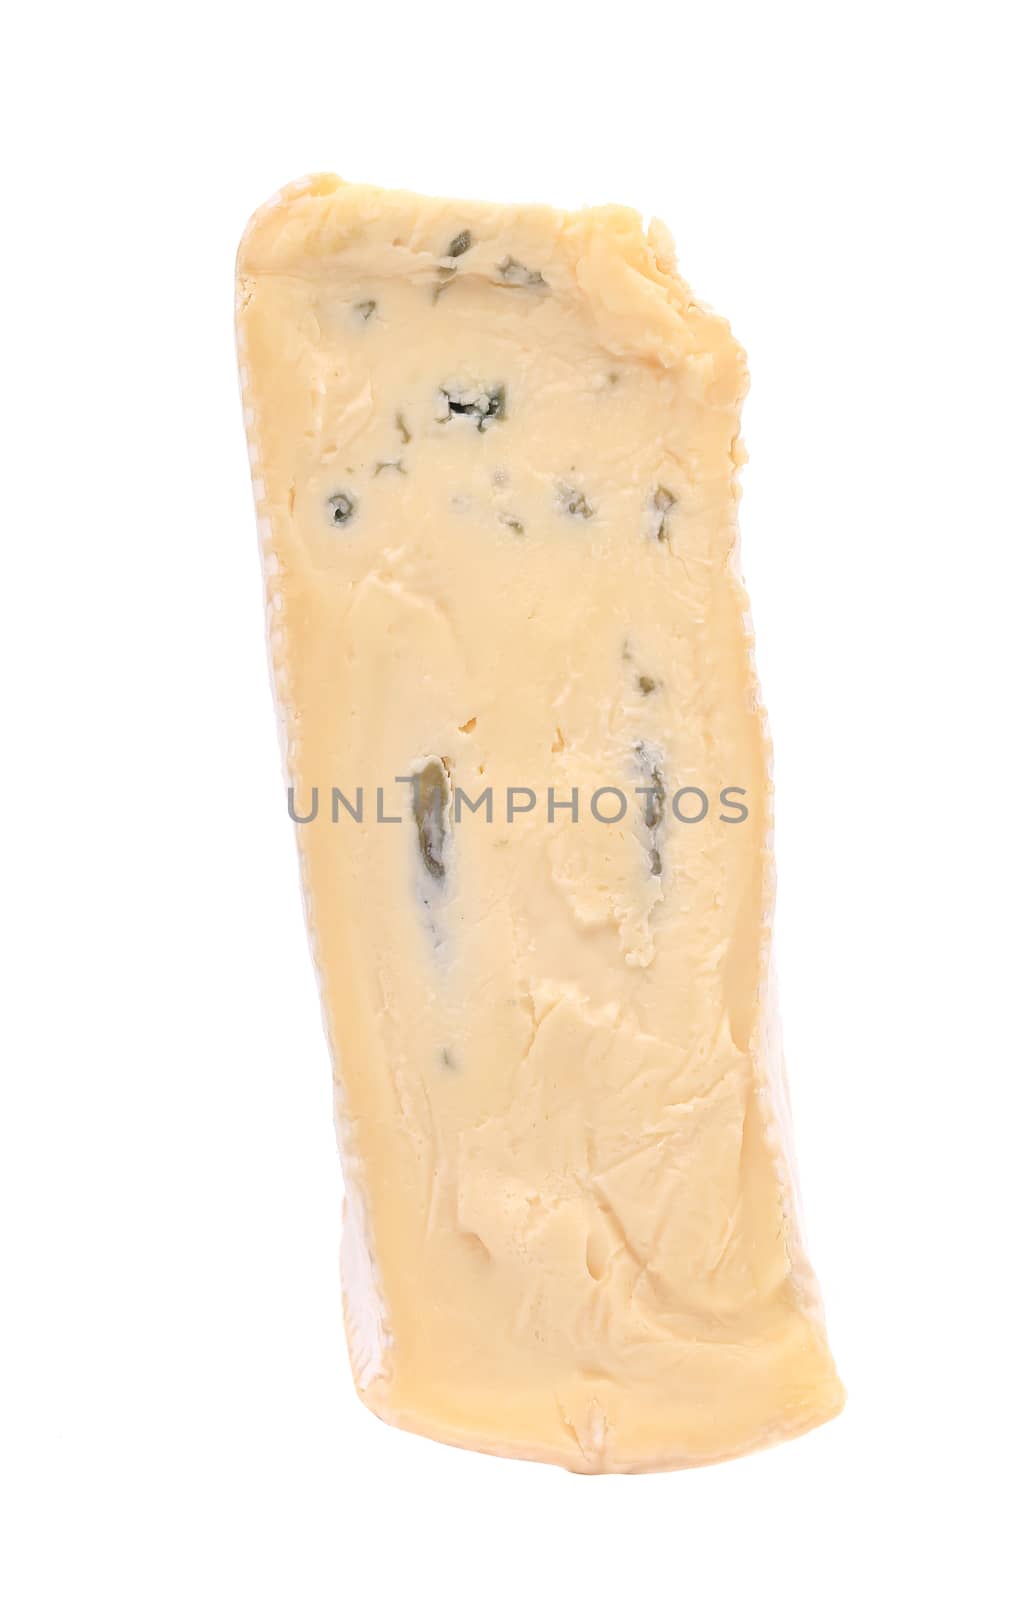 Dor Blue cheese. Isolated on a white background.